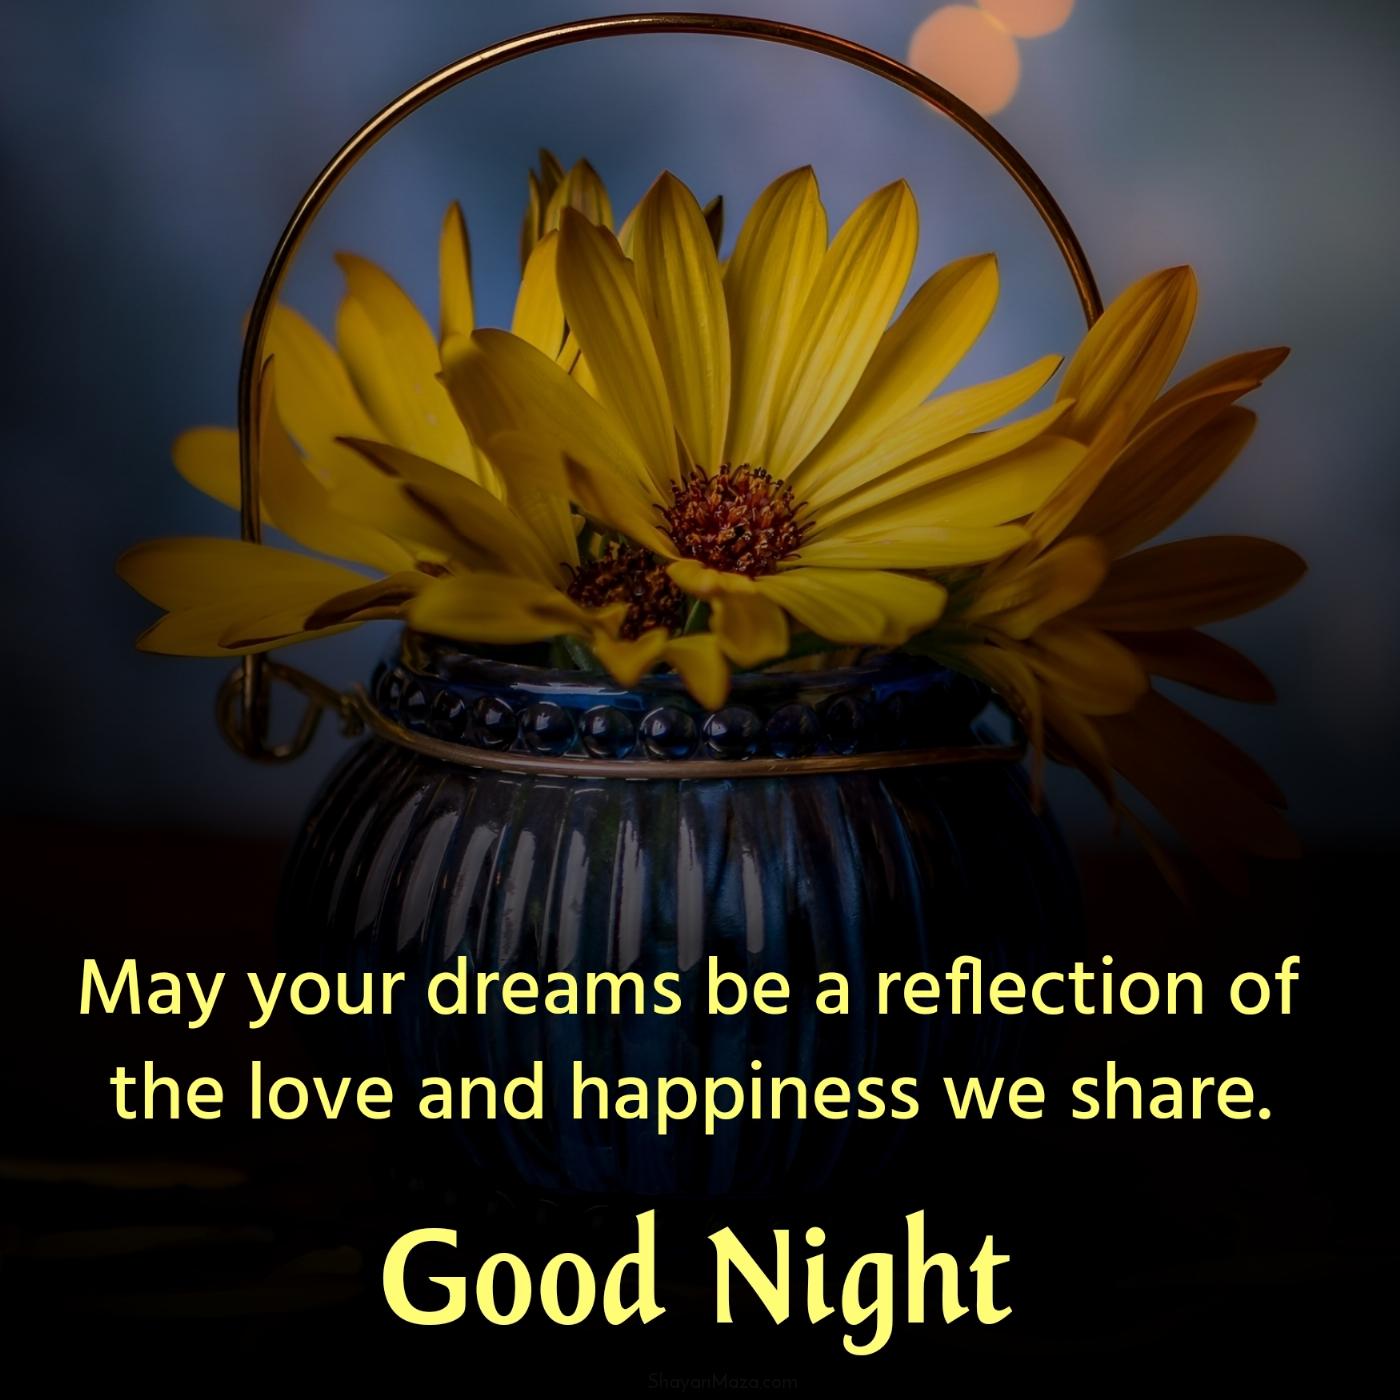 May your dreams be a reflection of the love and happiness we share